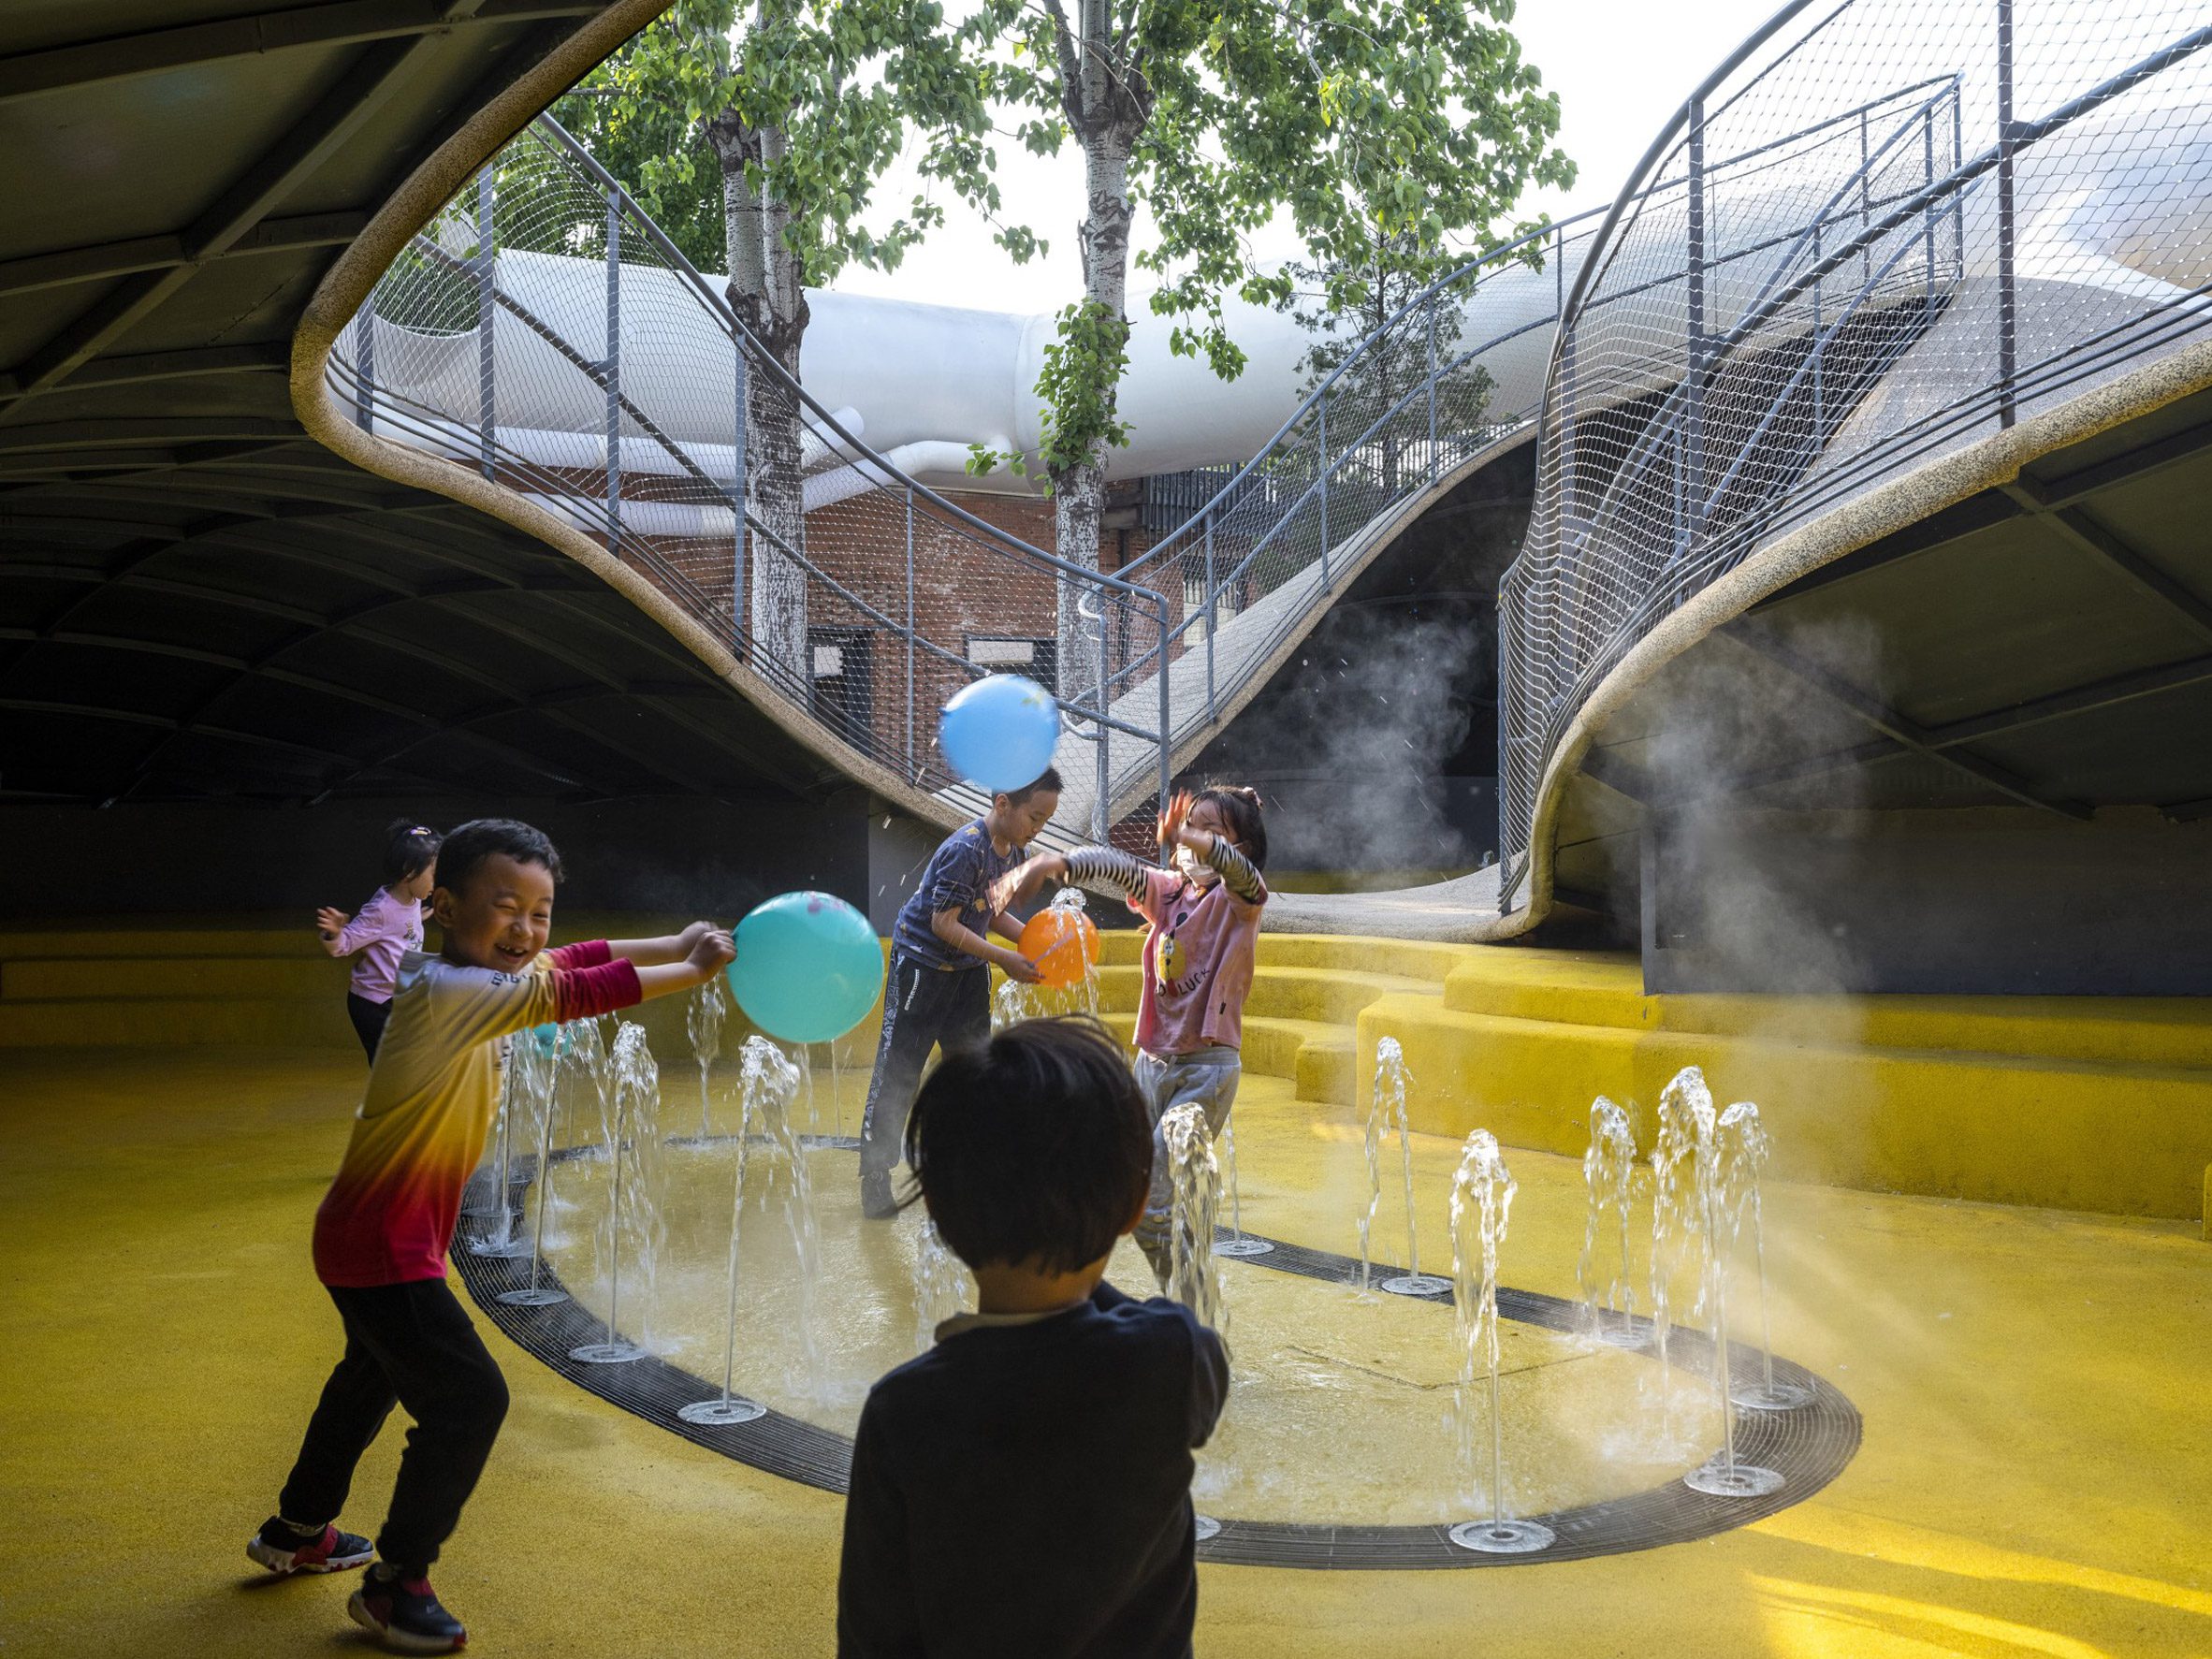 A fountain is built into the yellow floor of the playscape 